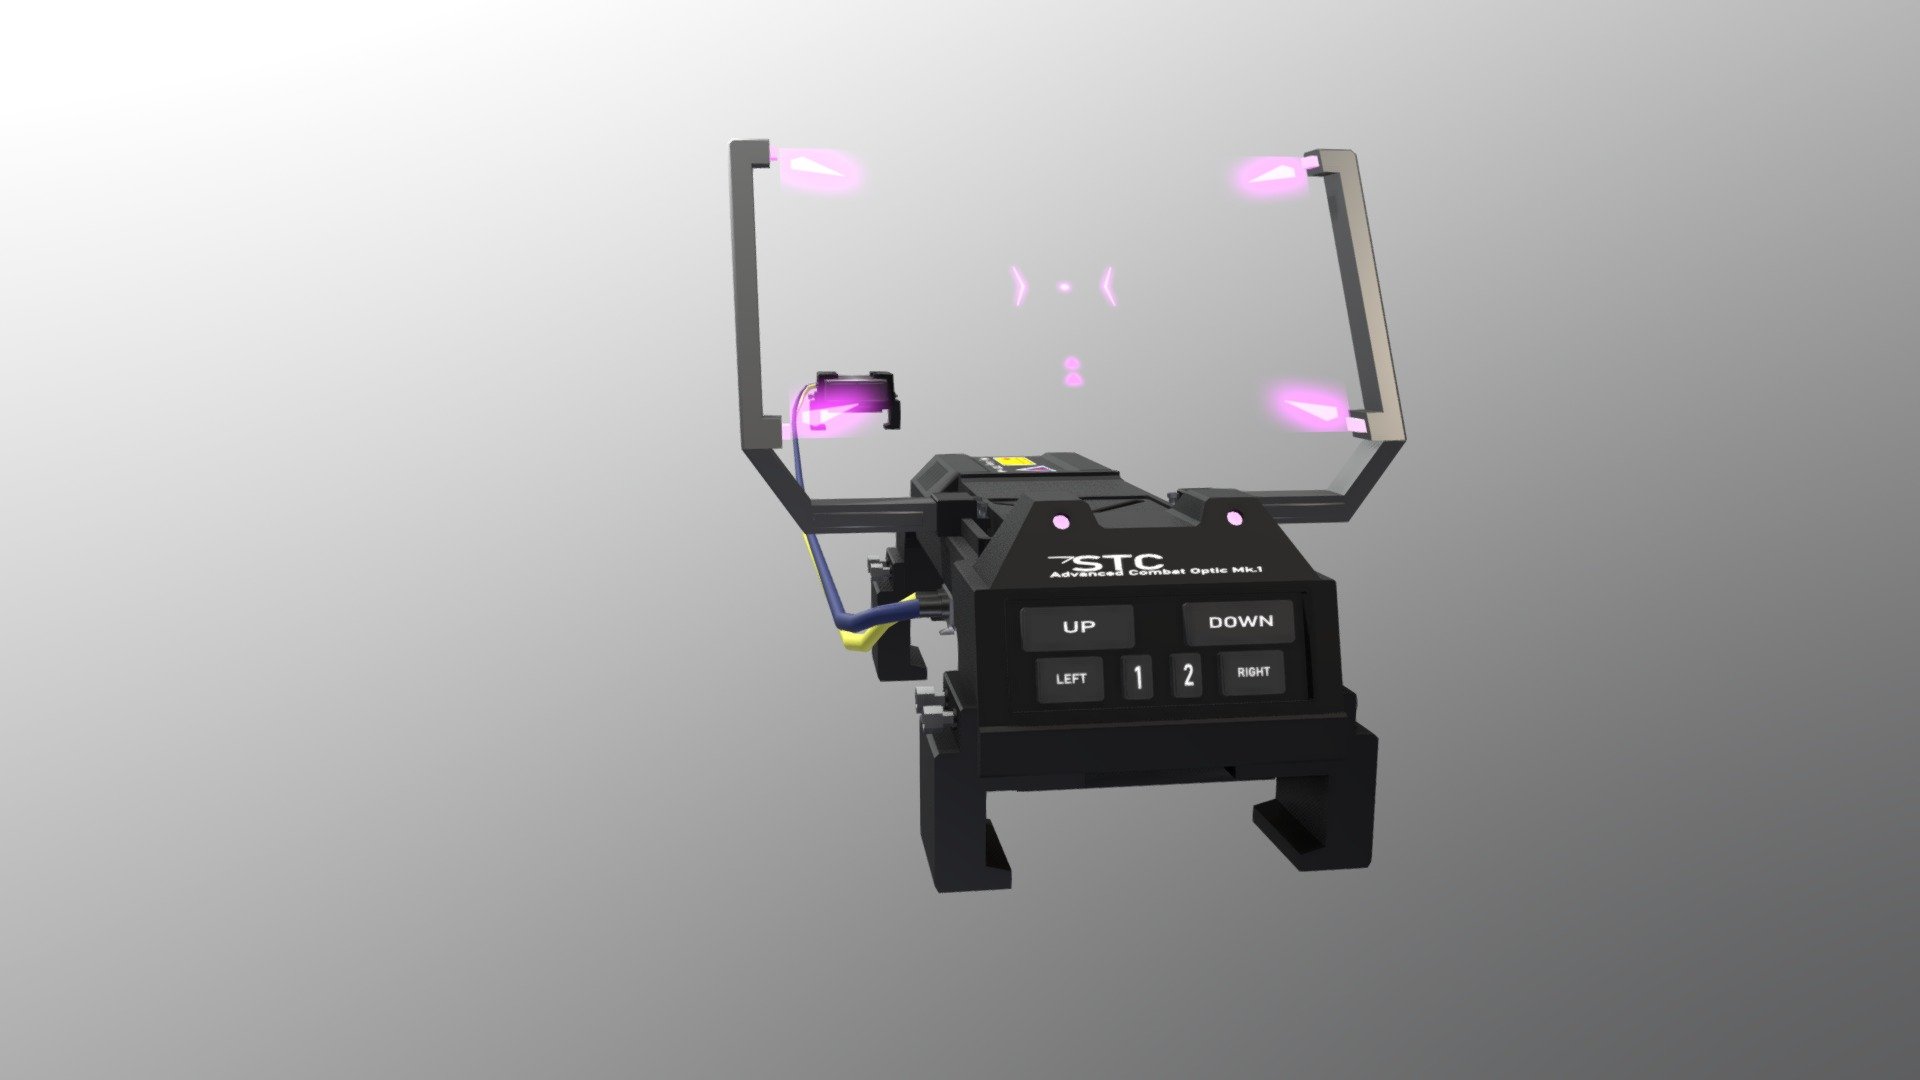 WIP
Weapon sight with futuristic range finder - Tech Holo Gun Sight - 3D model by Socksthecat 3d model